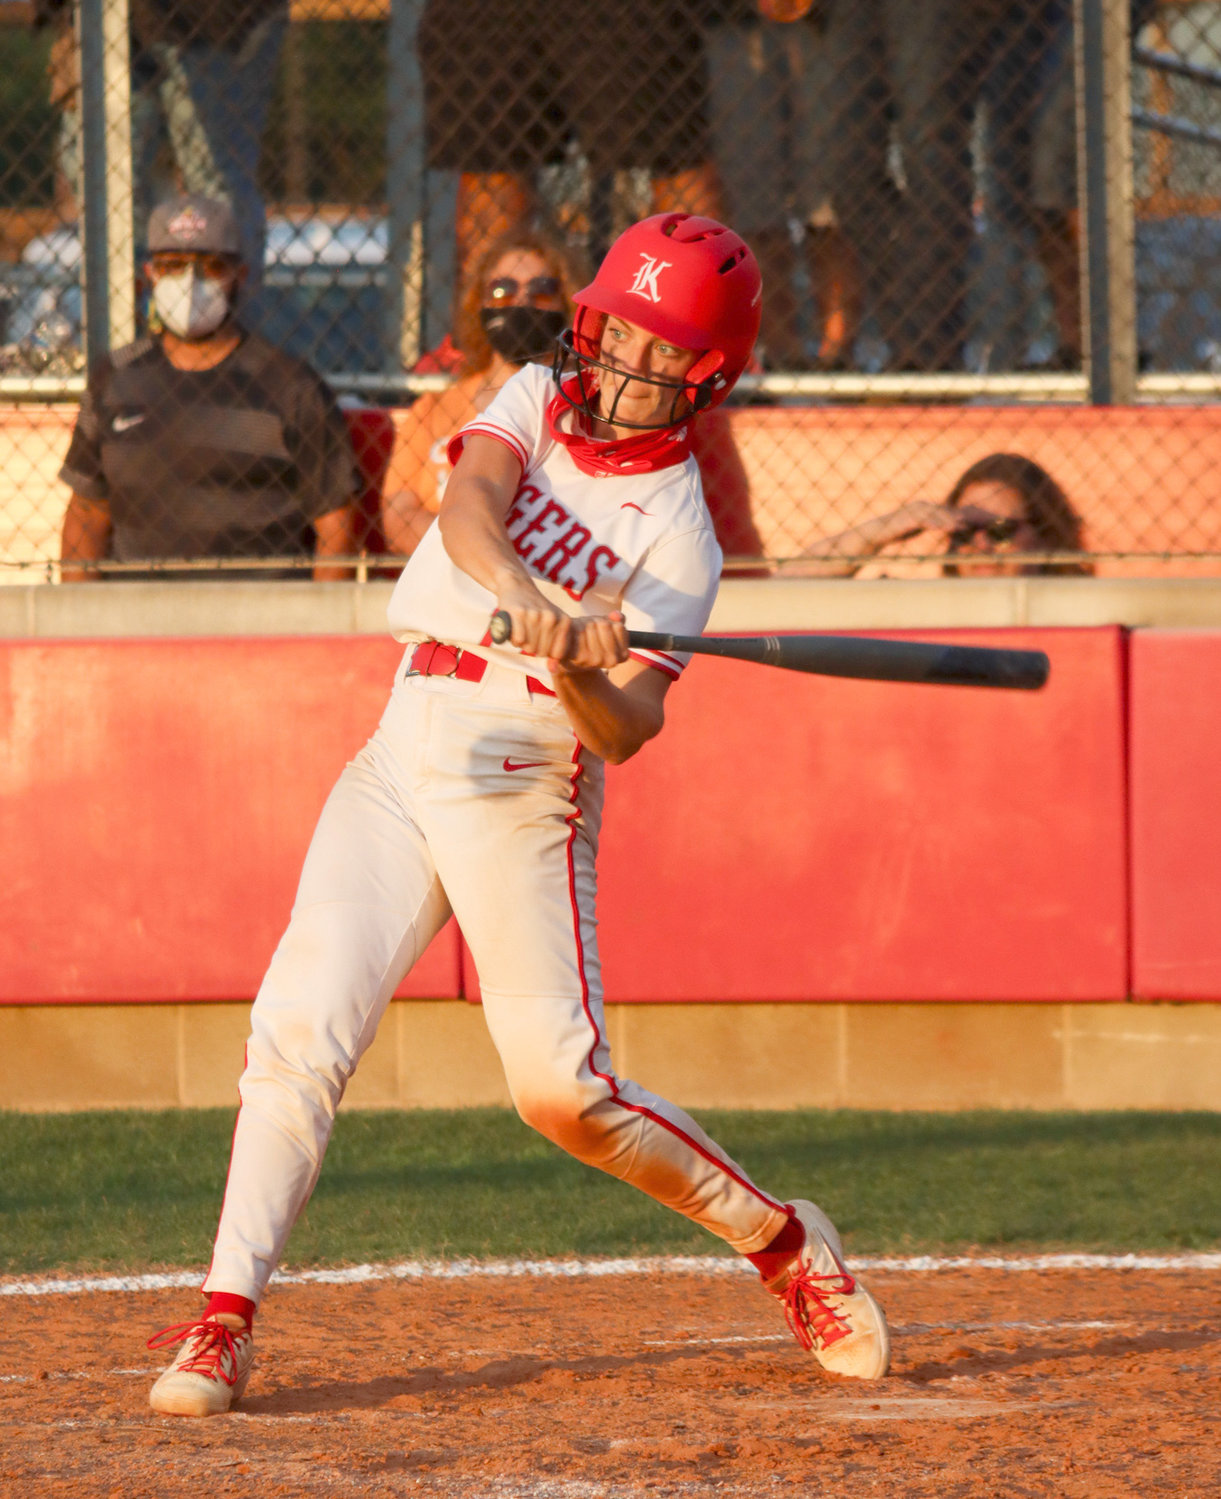 Katy High junior catcher Kailey Wyckoff was named District 19-6A softball’s Most Valuable Player for the 2021 season.